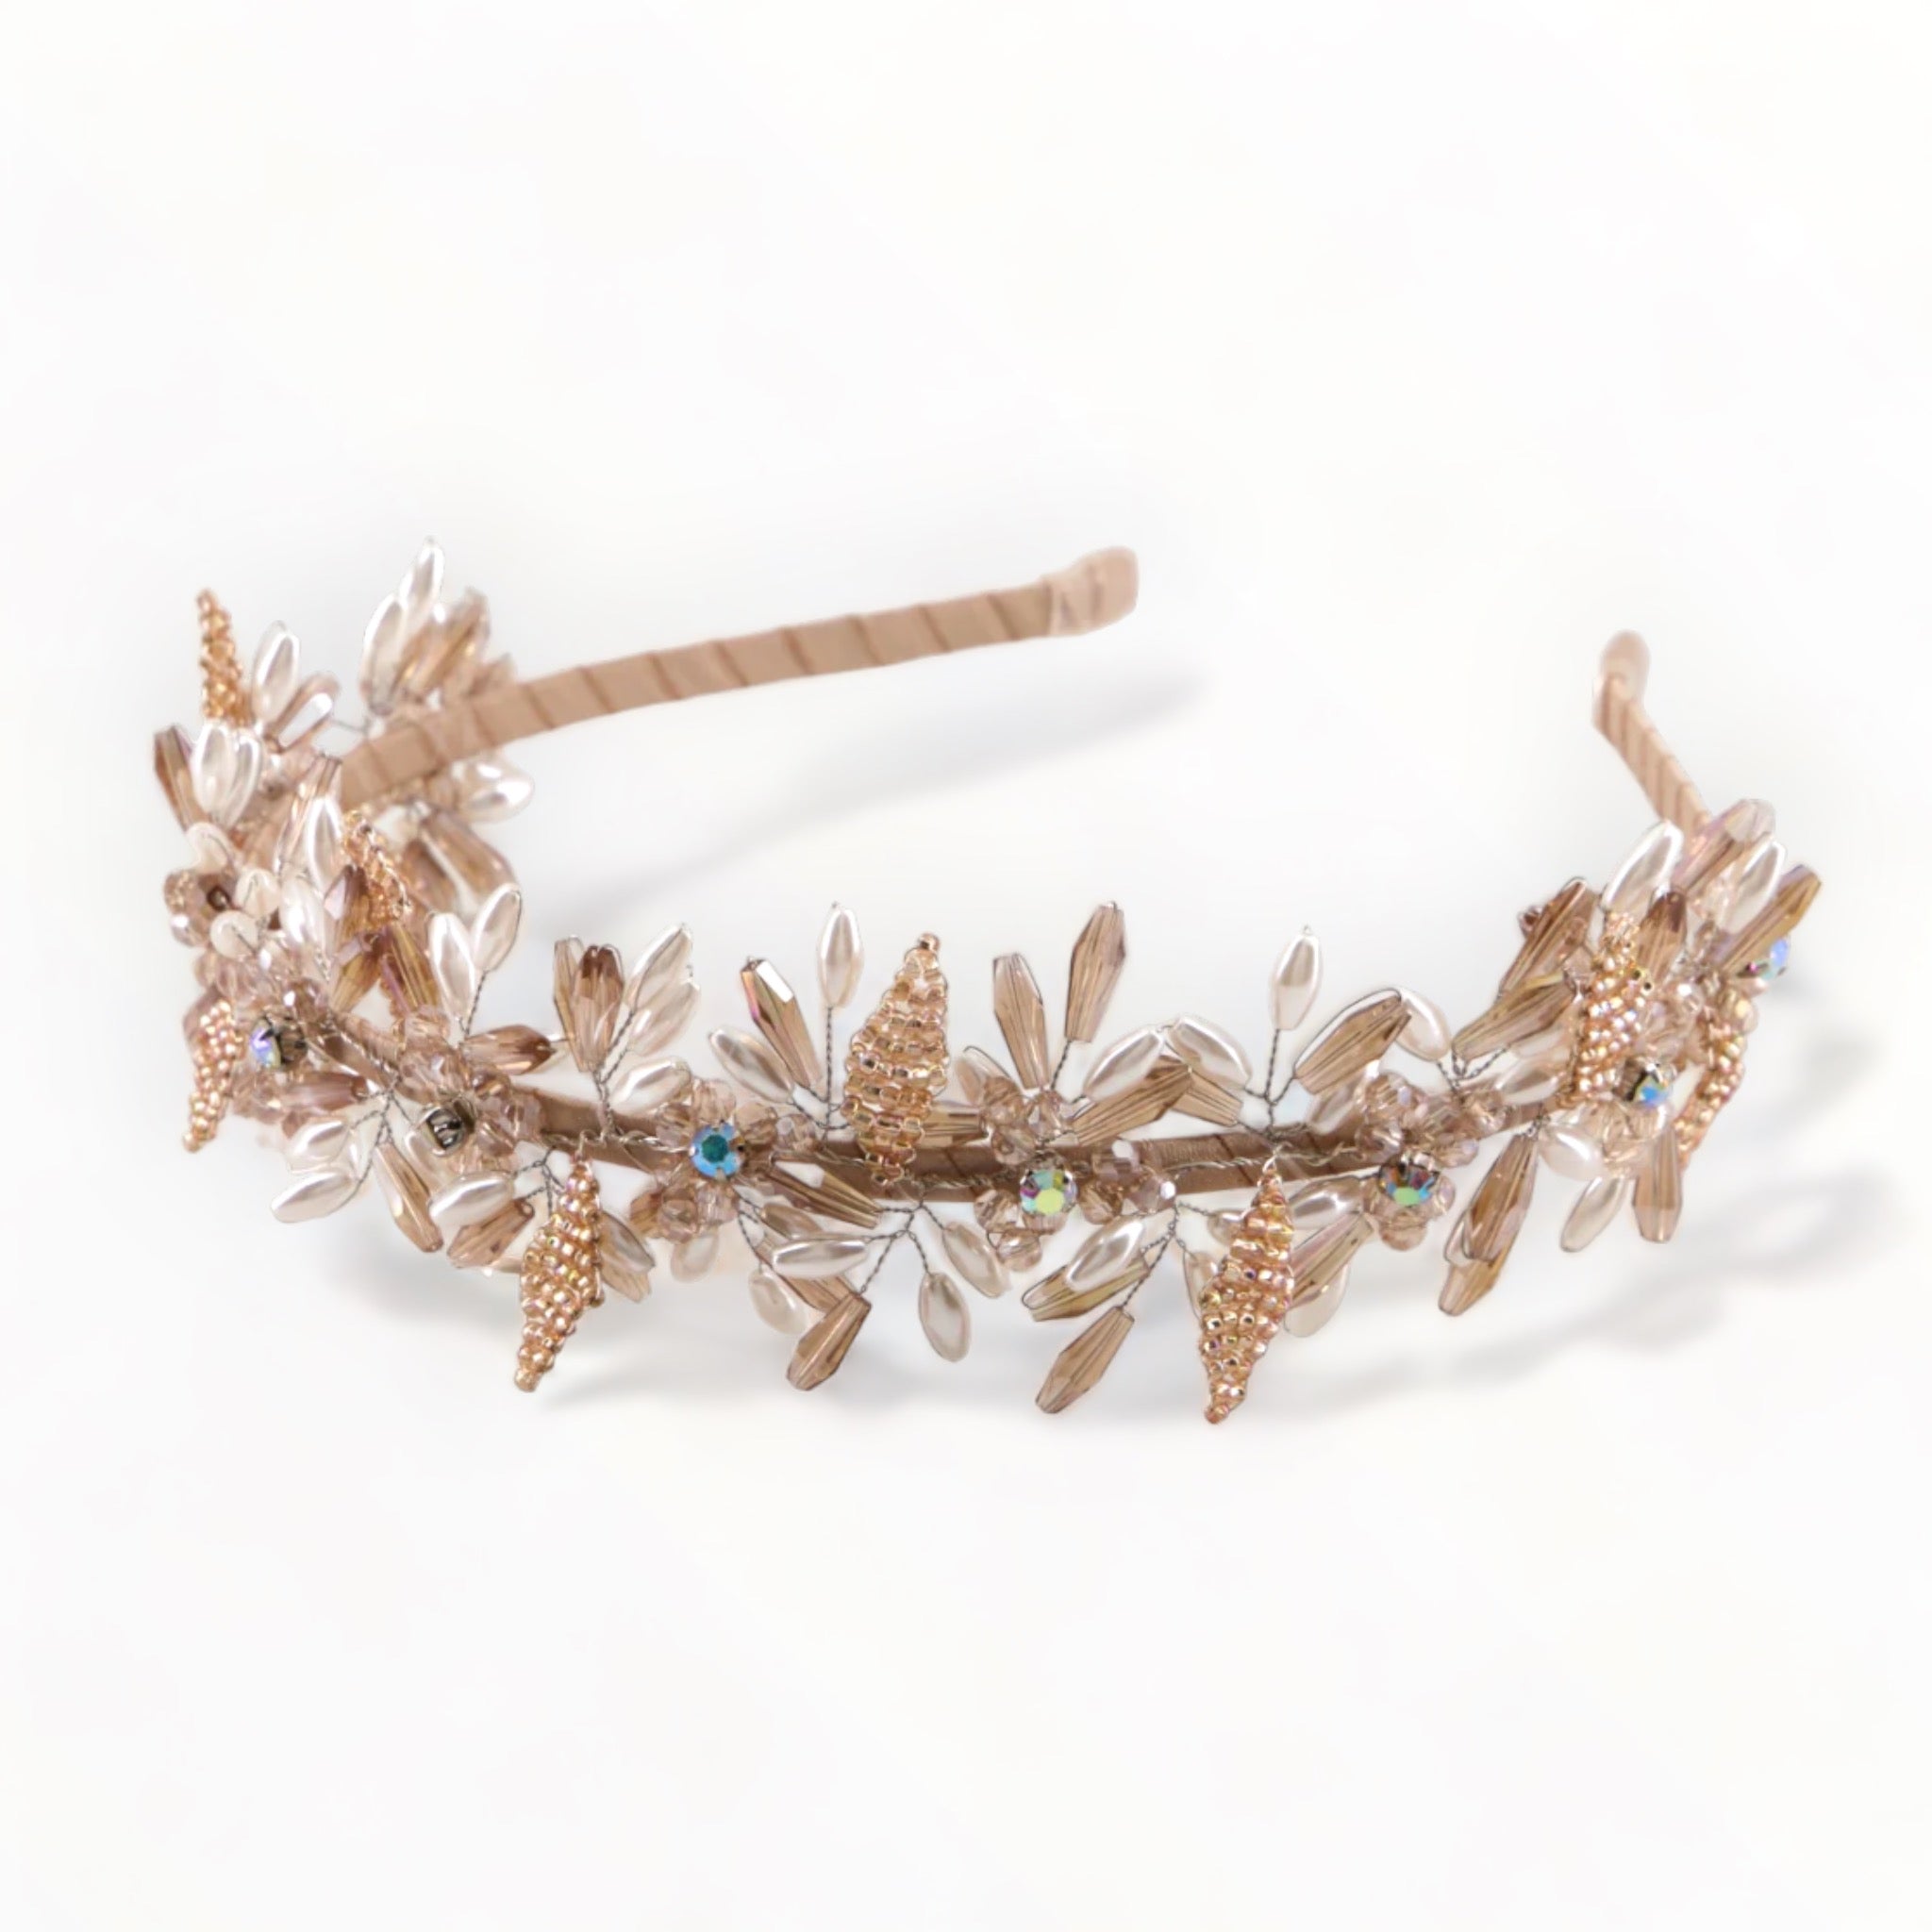 Best Bridal tiaras for bridesmaids by Sienna Likes to Party